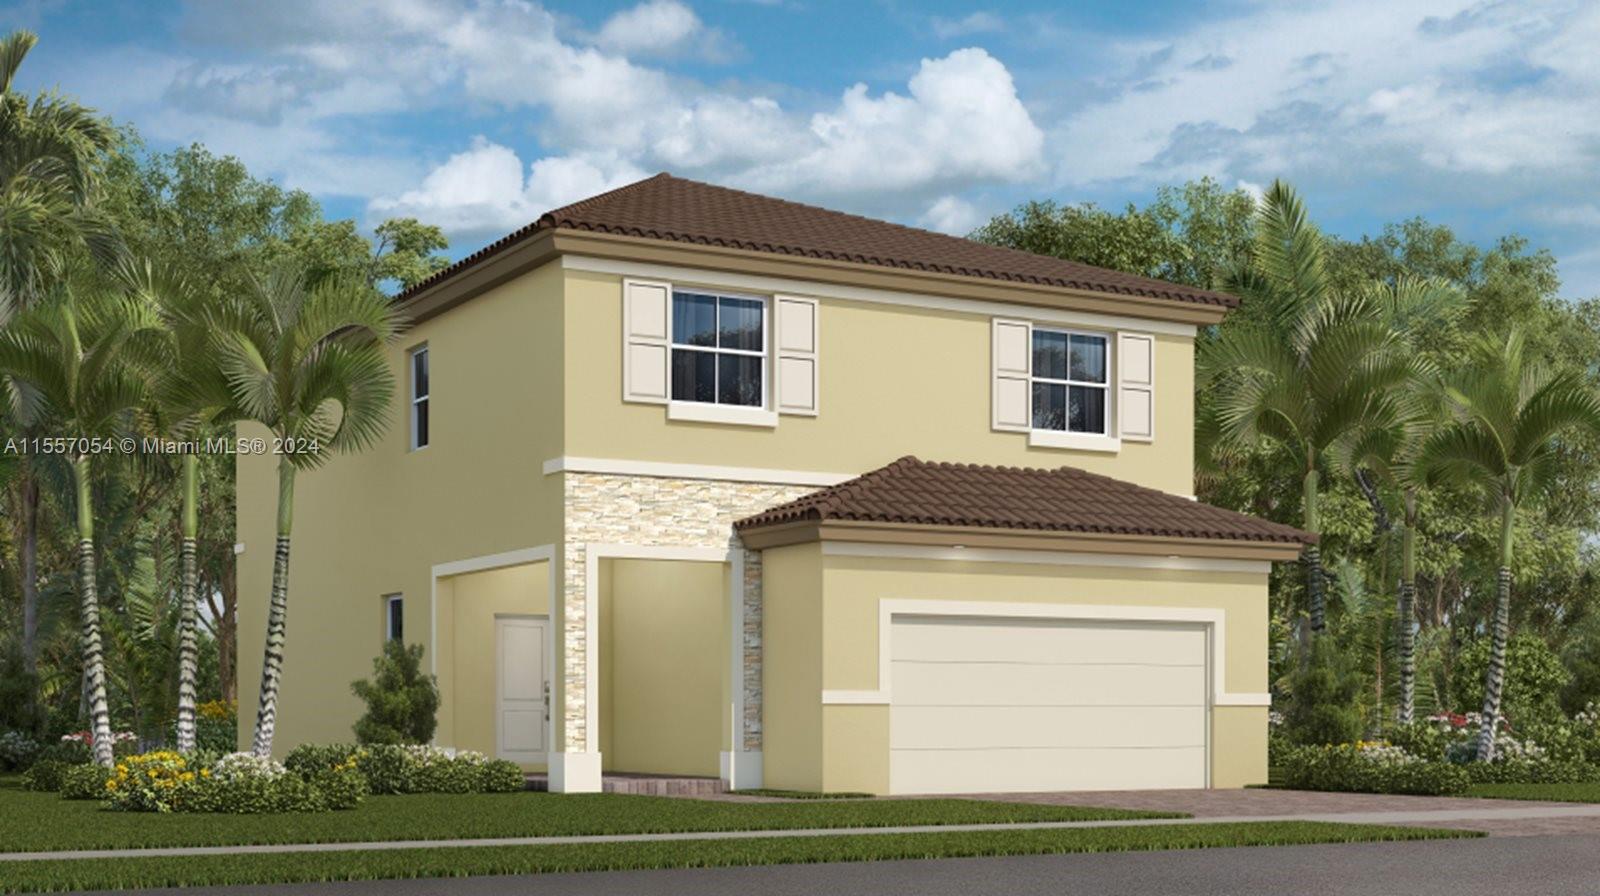 Madeira is a collection offering brand-new single-family homes for sale at the Altamira master-planned community in Homestead, FL. Residents enjoy access to a range of exclusive amenities, including an expansive clubhouse with a fitness center, restaurant and bar, golf pro shop, ball room, gathering space and business center. A swimming pool, tennis courts, BBQ area, golf course and parks are also included. The local area is host to endless attractions, the Homestead Speedway, Keys Gate Tennis Club, dining, shopping and entertainment.